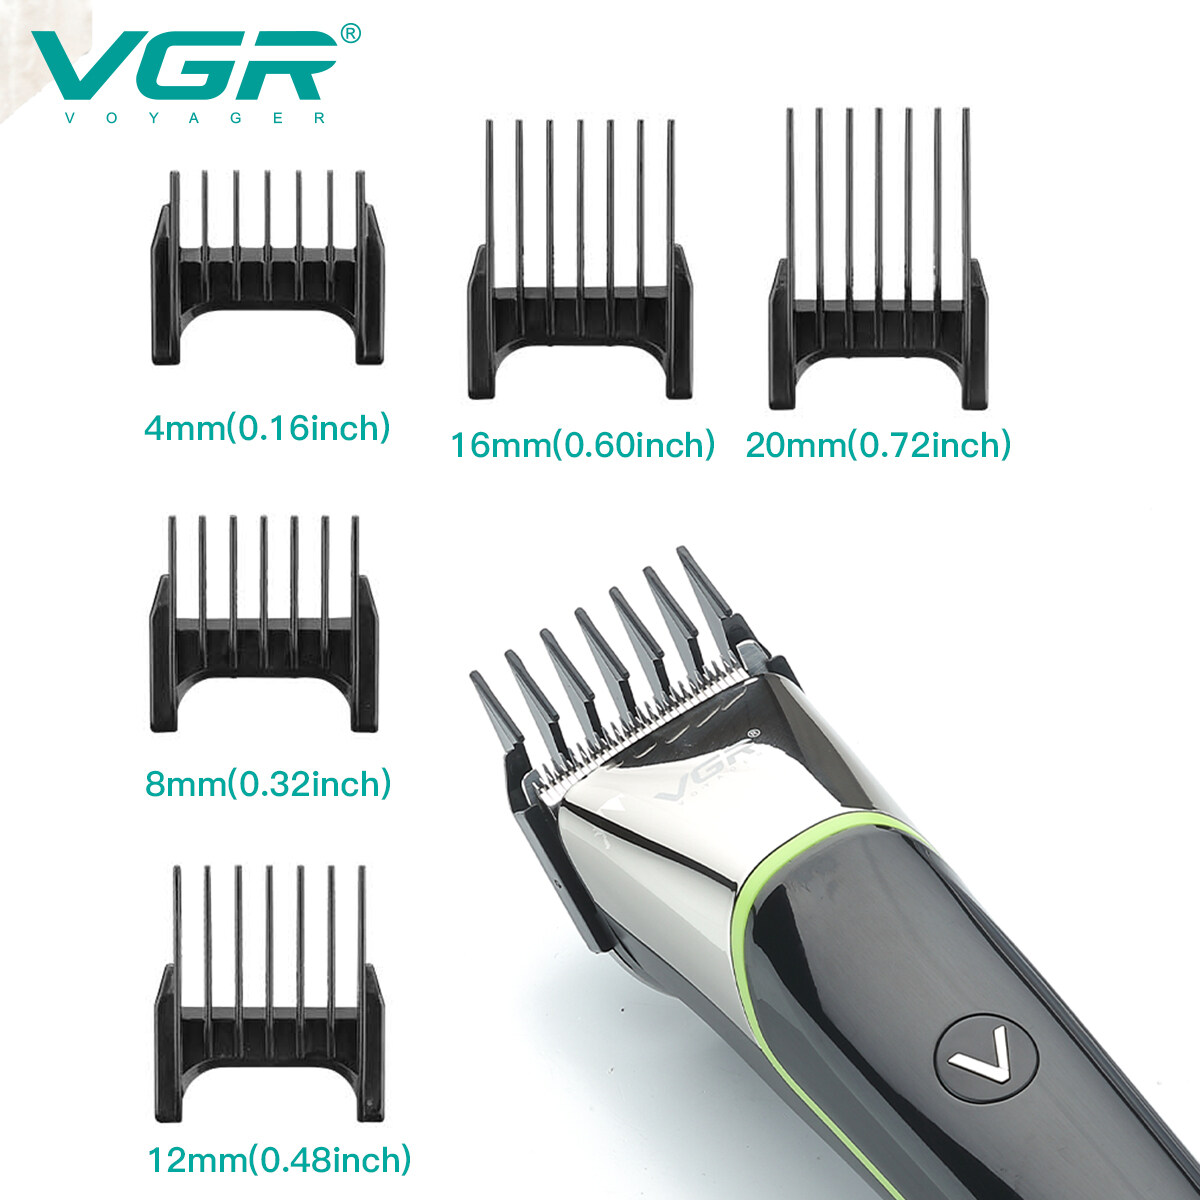 Cordless Hair Clipper For Men Factory, Cordless Hair Clipper For Men Manufacturer, Wholesale Small Cordless Hair Clippers